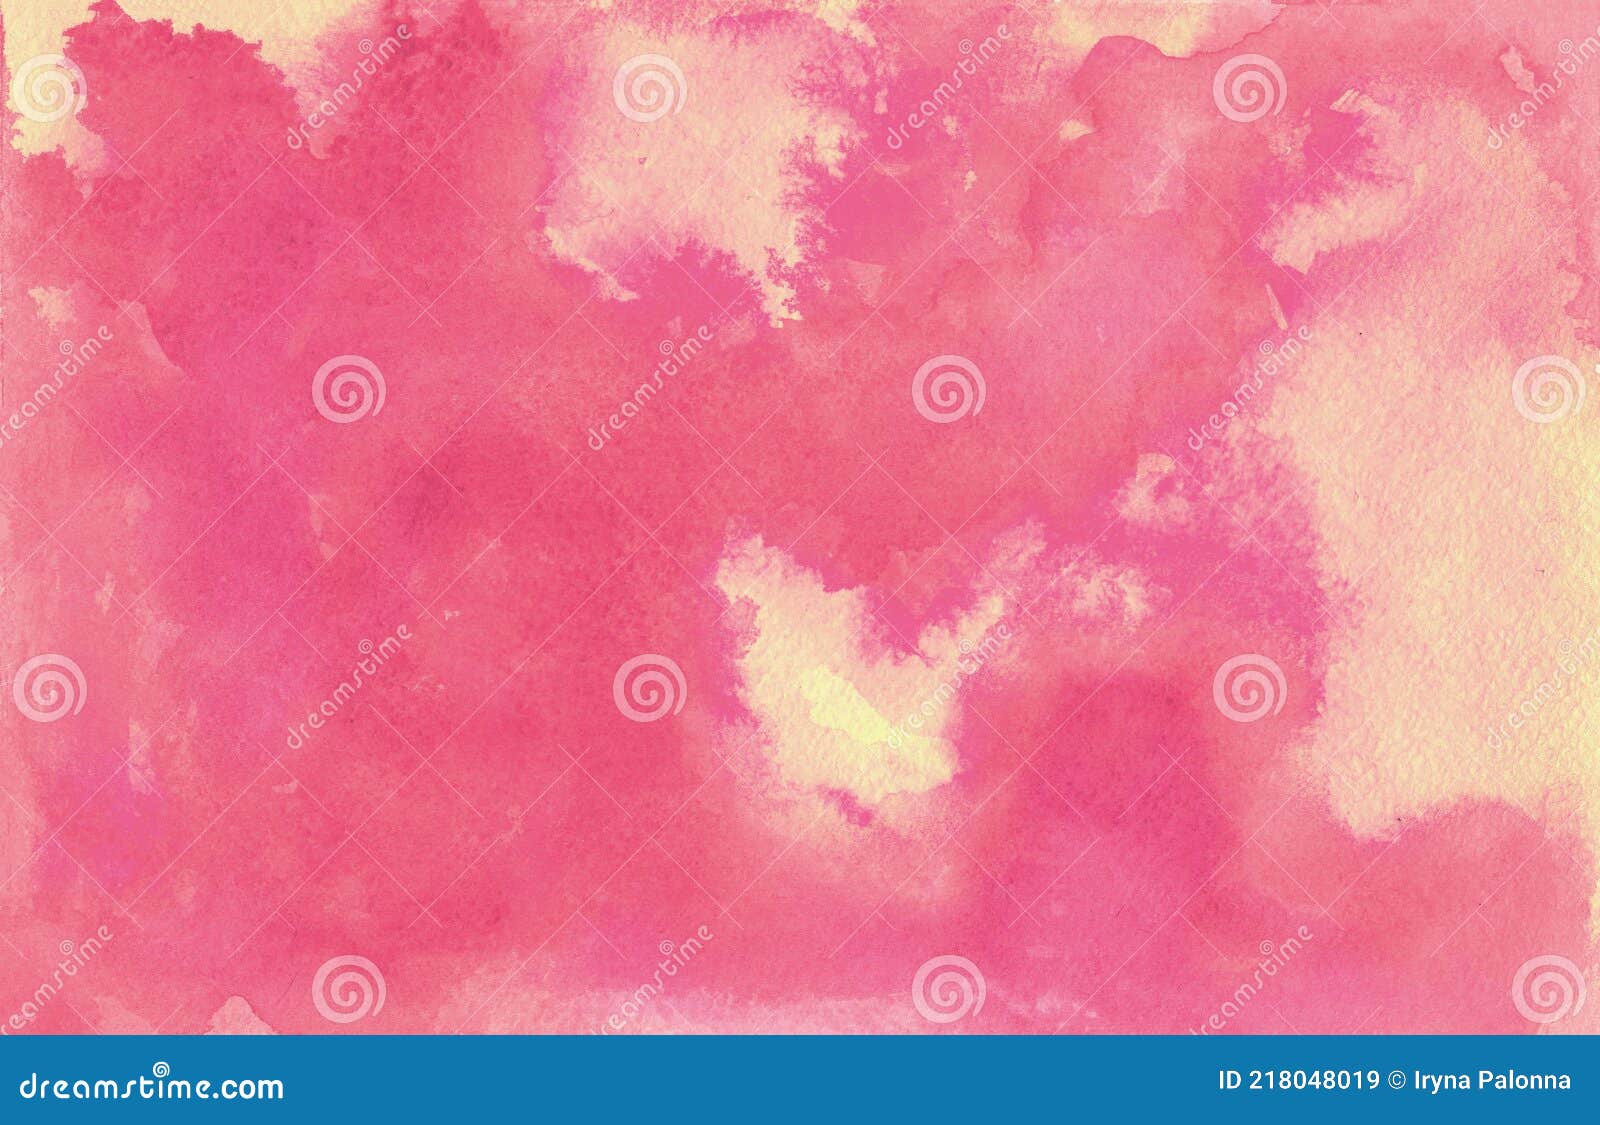 Soft Pink Watercolor Background with Yellow Stains Stock Illustration ...